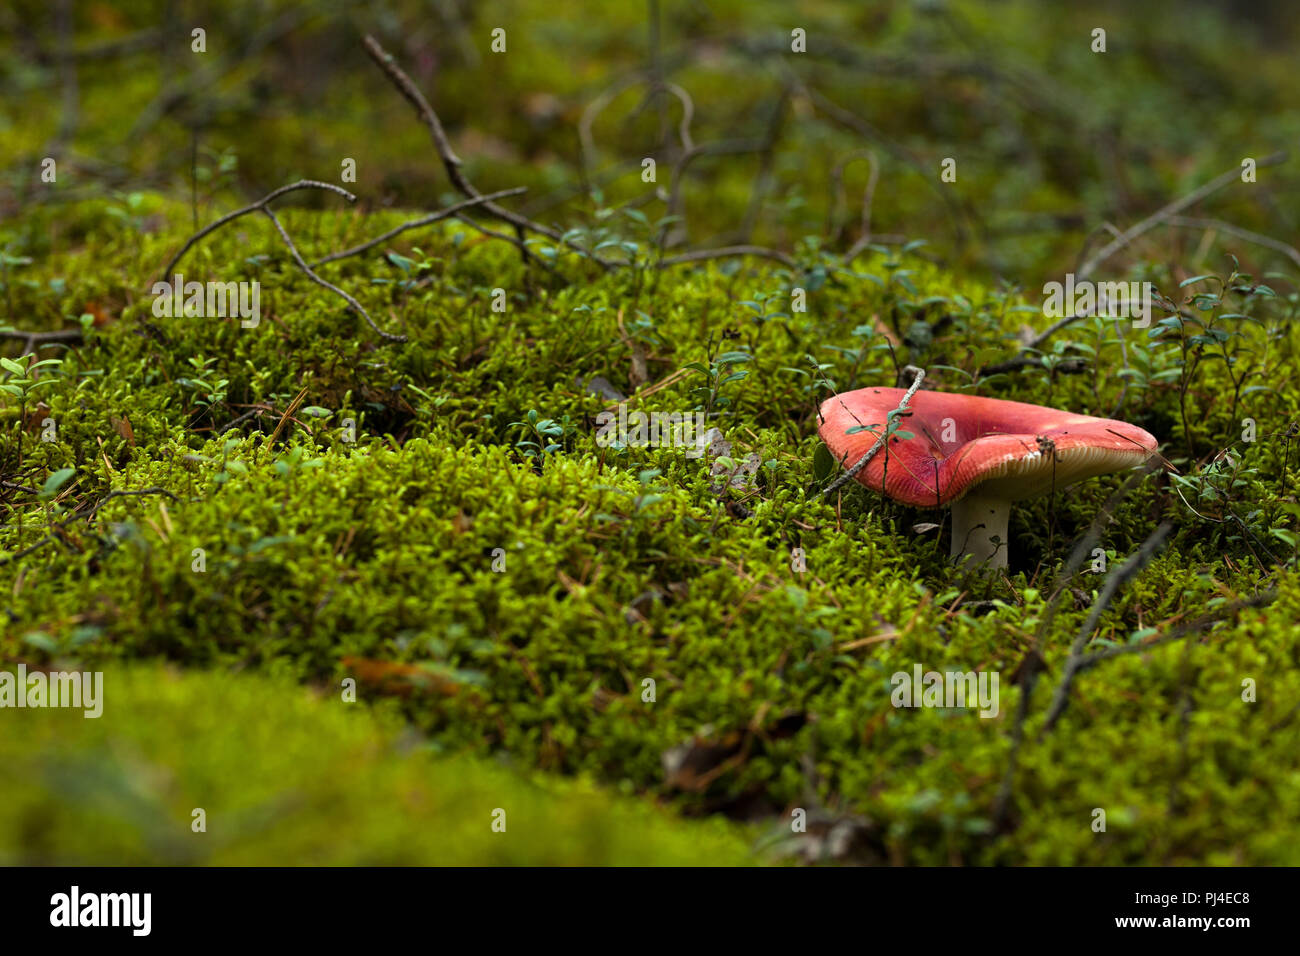 A russula mushroom growing in a moss in a pinery Stock Photo